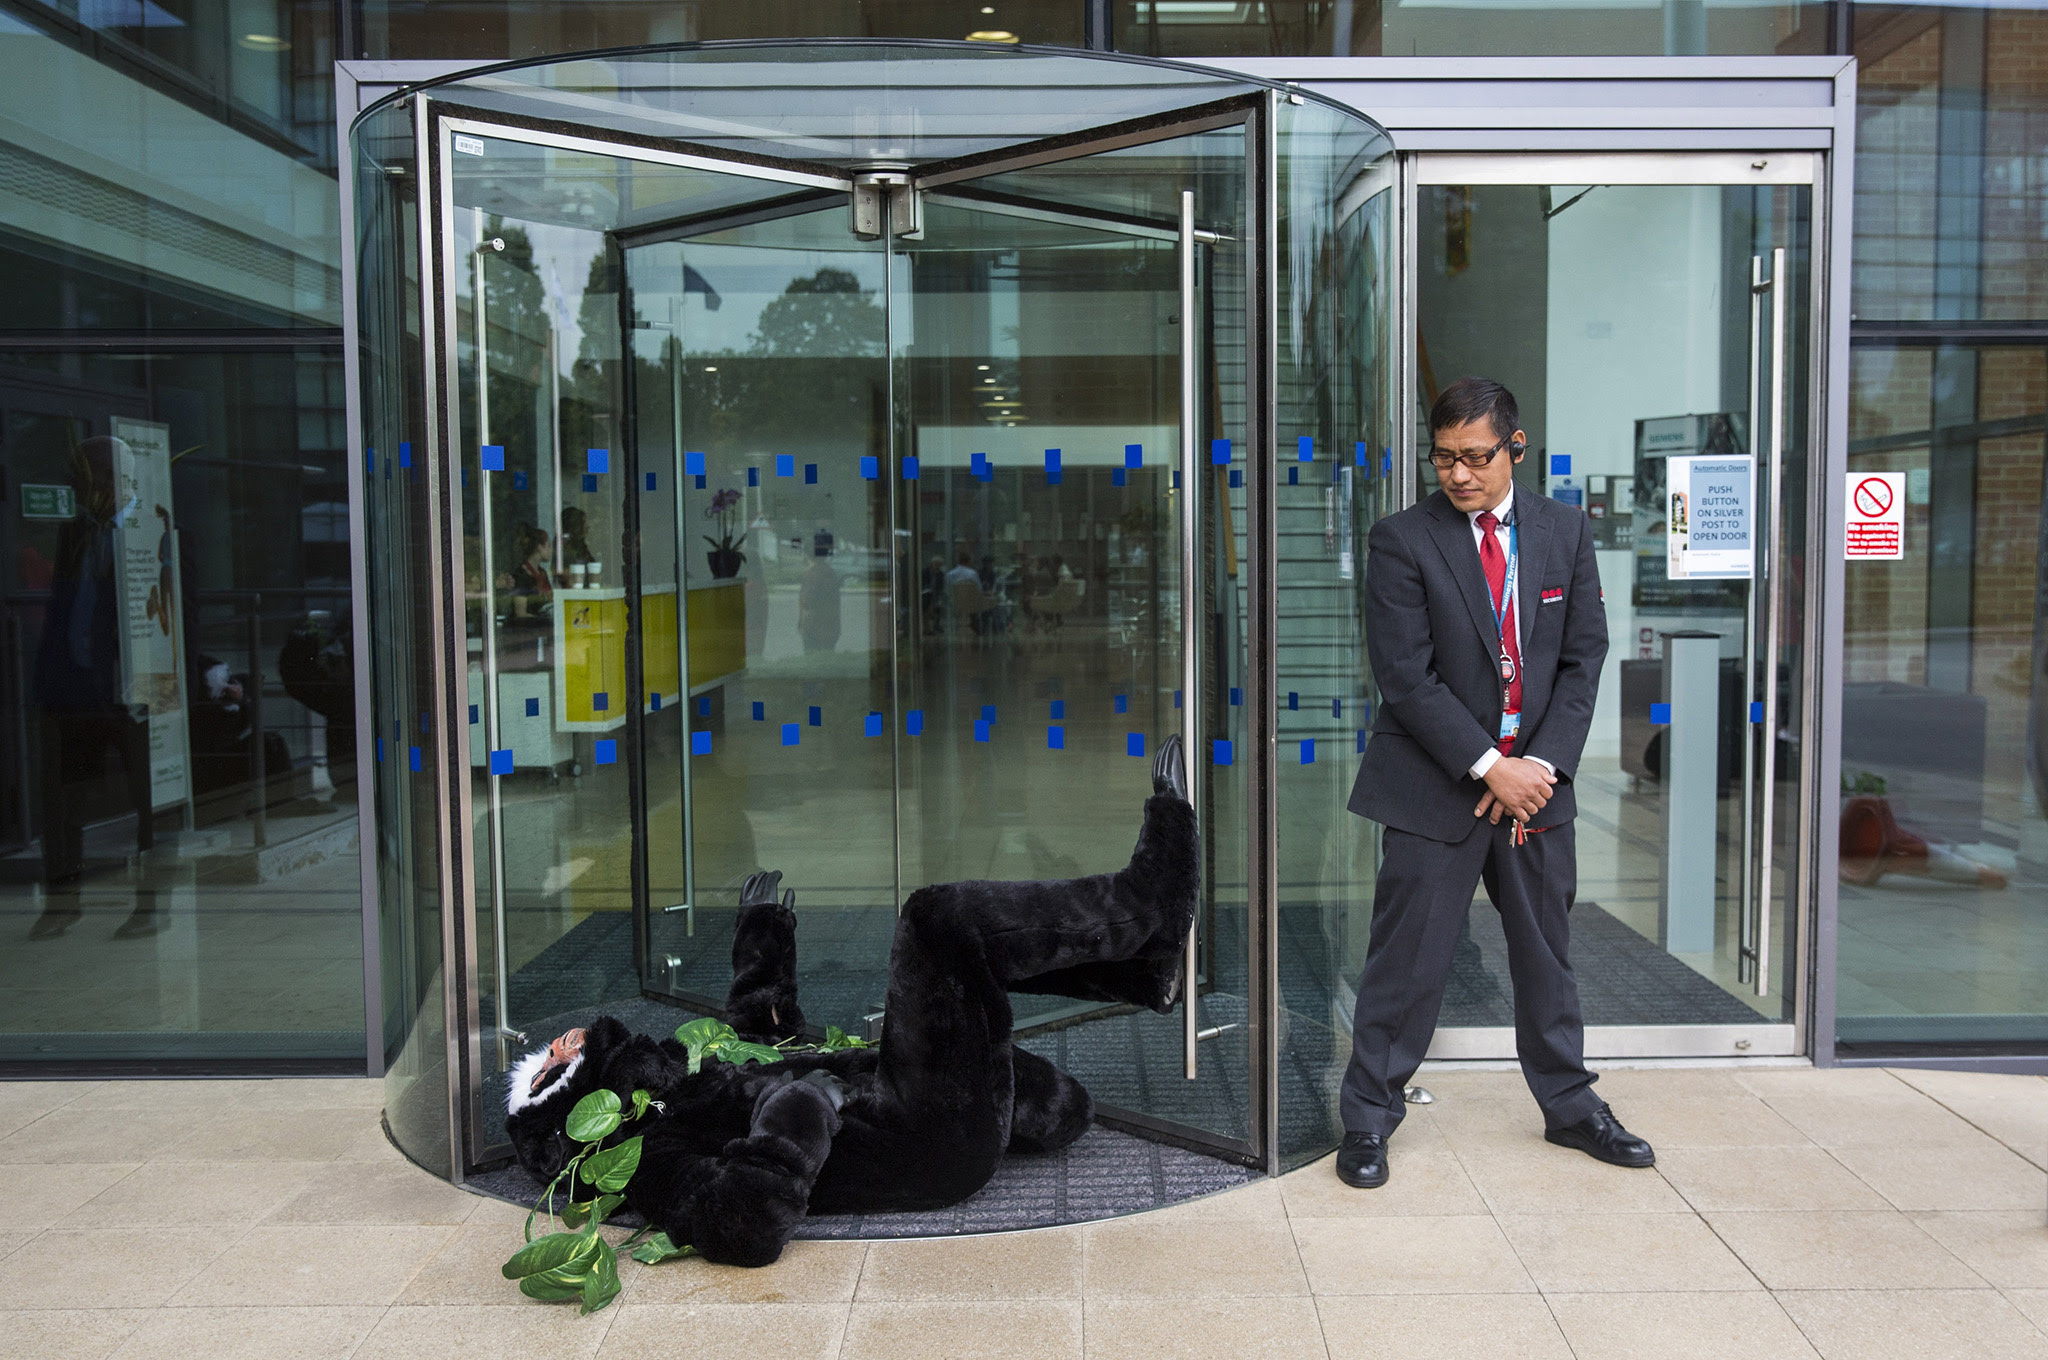 CAMBERLEY, ENGLAND - AUGUST 11: A Siemens security guard looks on as a Greenpeace activist dressed in a monkey costume demonstrate outside the Siemens' UK headquarters on August 11, 2016 in Camberley, England. Greenpeace activists joined two members of the Amazonian Munduruku tribe at German engineering company Siemens' UK headquarters today to protest the building of mega dams in the Brazilian Amazon and to demand a meeting with senior management at the company. (Photo by Jack Taylor/Getty Images)